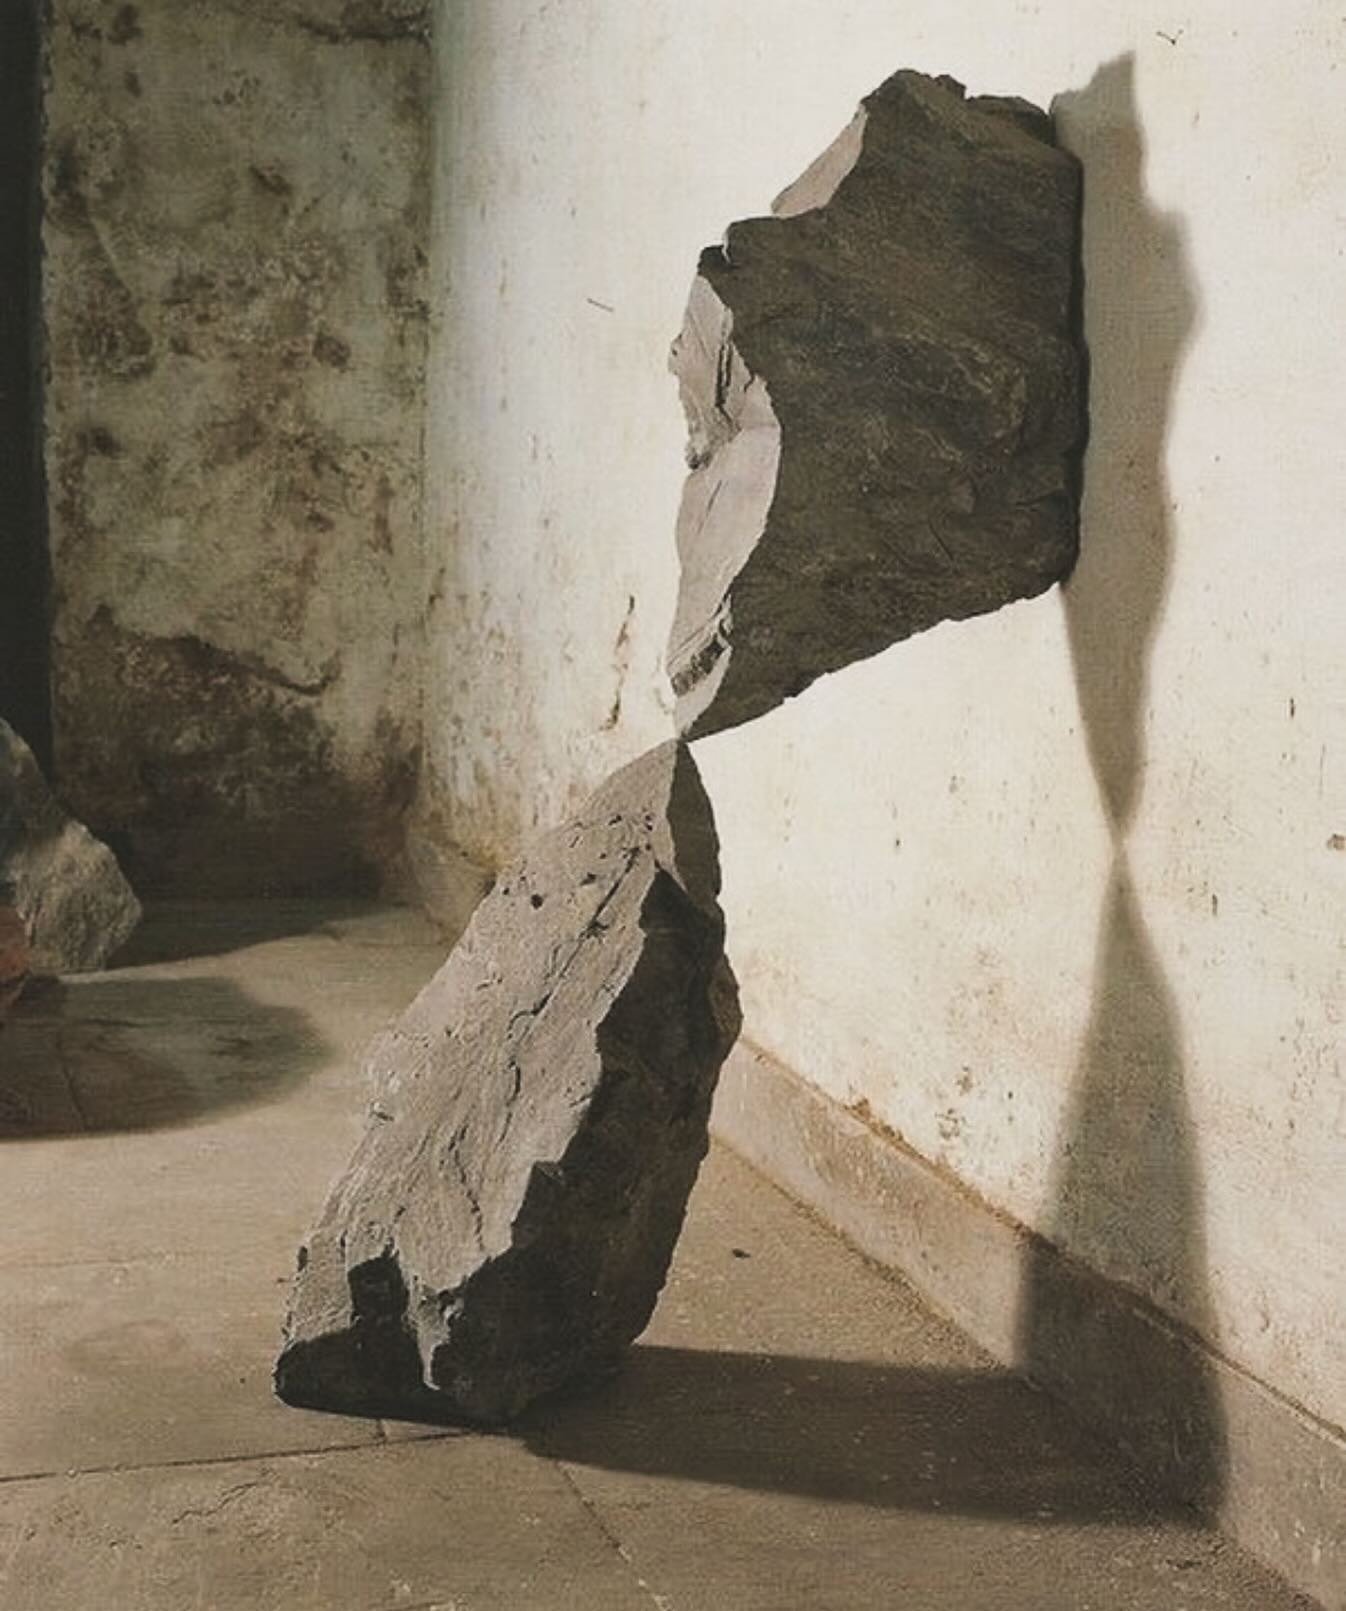 Andy Goldsworthy, Balance 1977
.
.
#inspiration 
#andygoldsworthy 
#reference 
#referenceimage